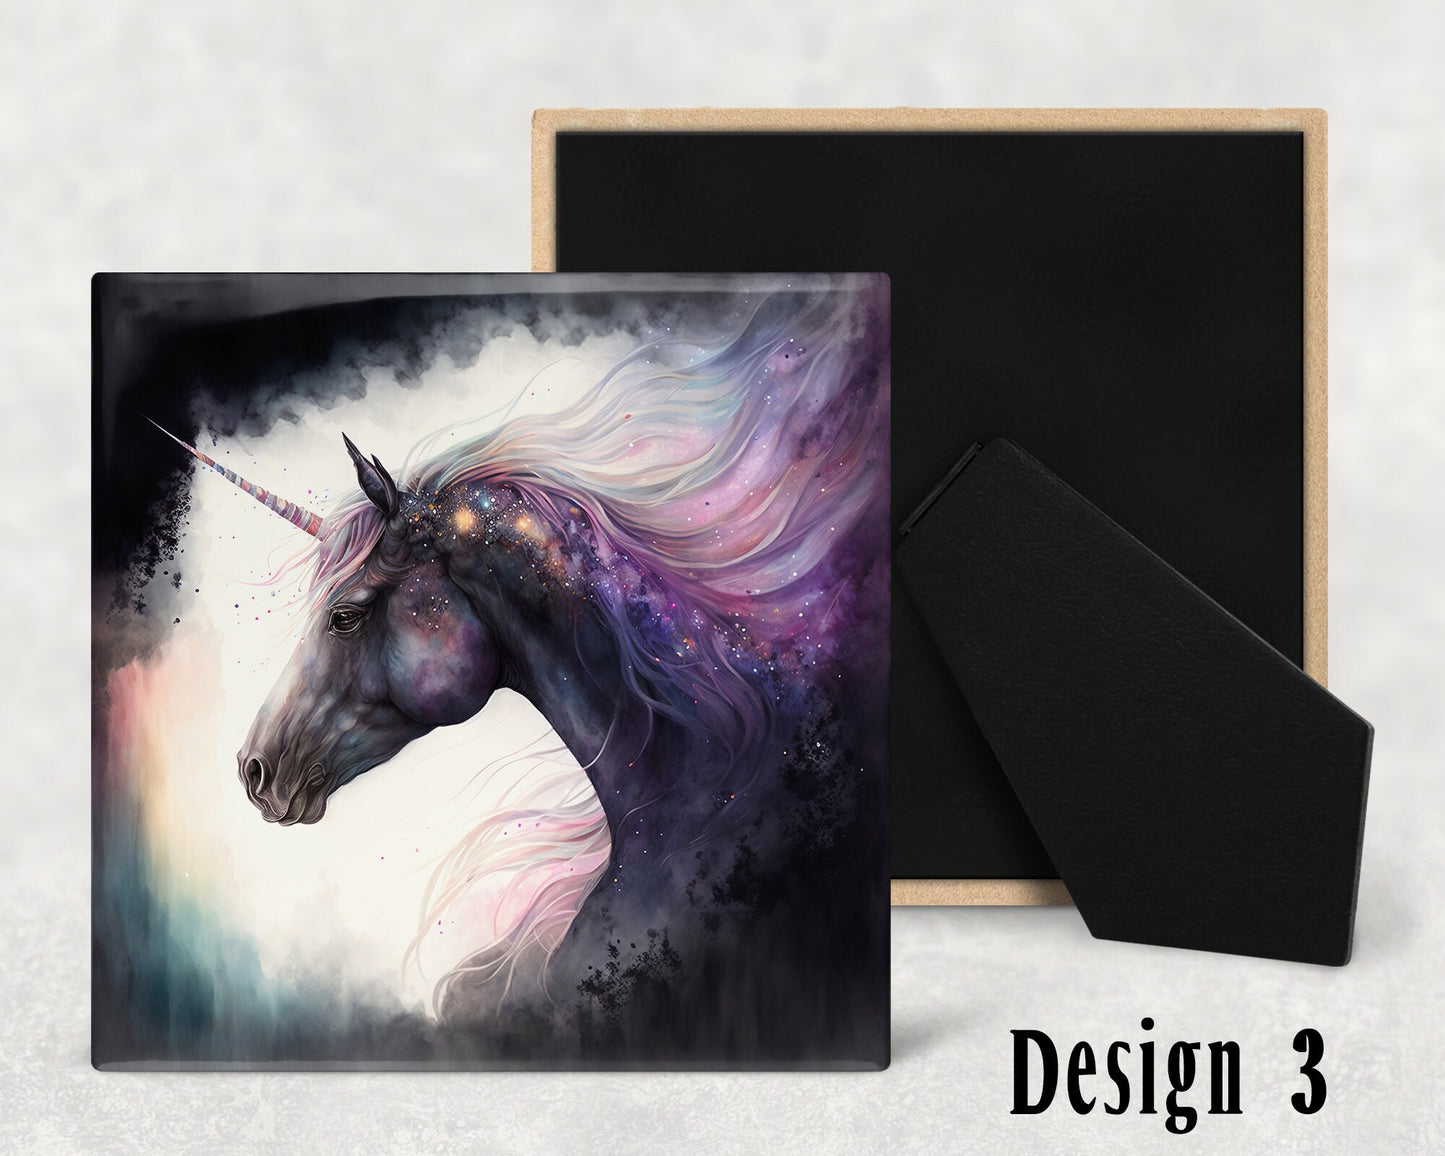 Dark Unicorns Art Decorative Ceramic Tile Set with Optional Easel Back  - Available in 3 sizes - 4 Designs to chose from